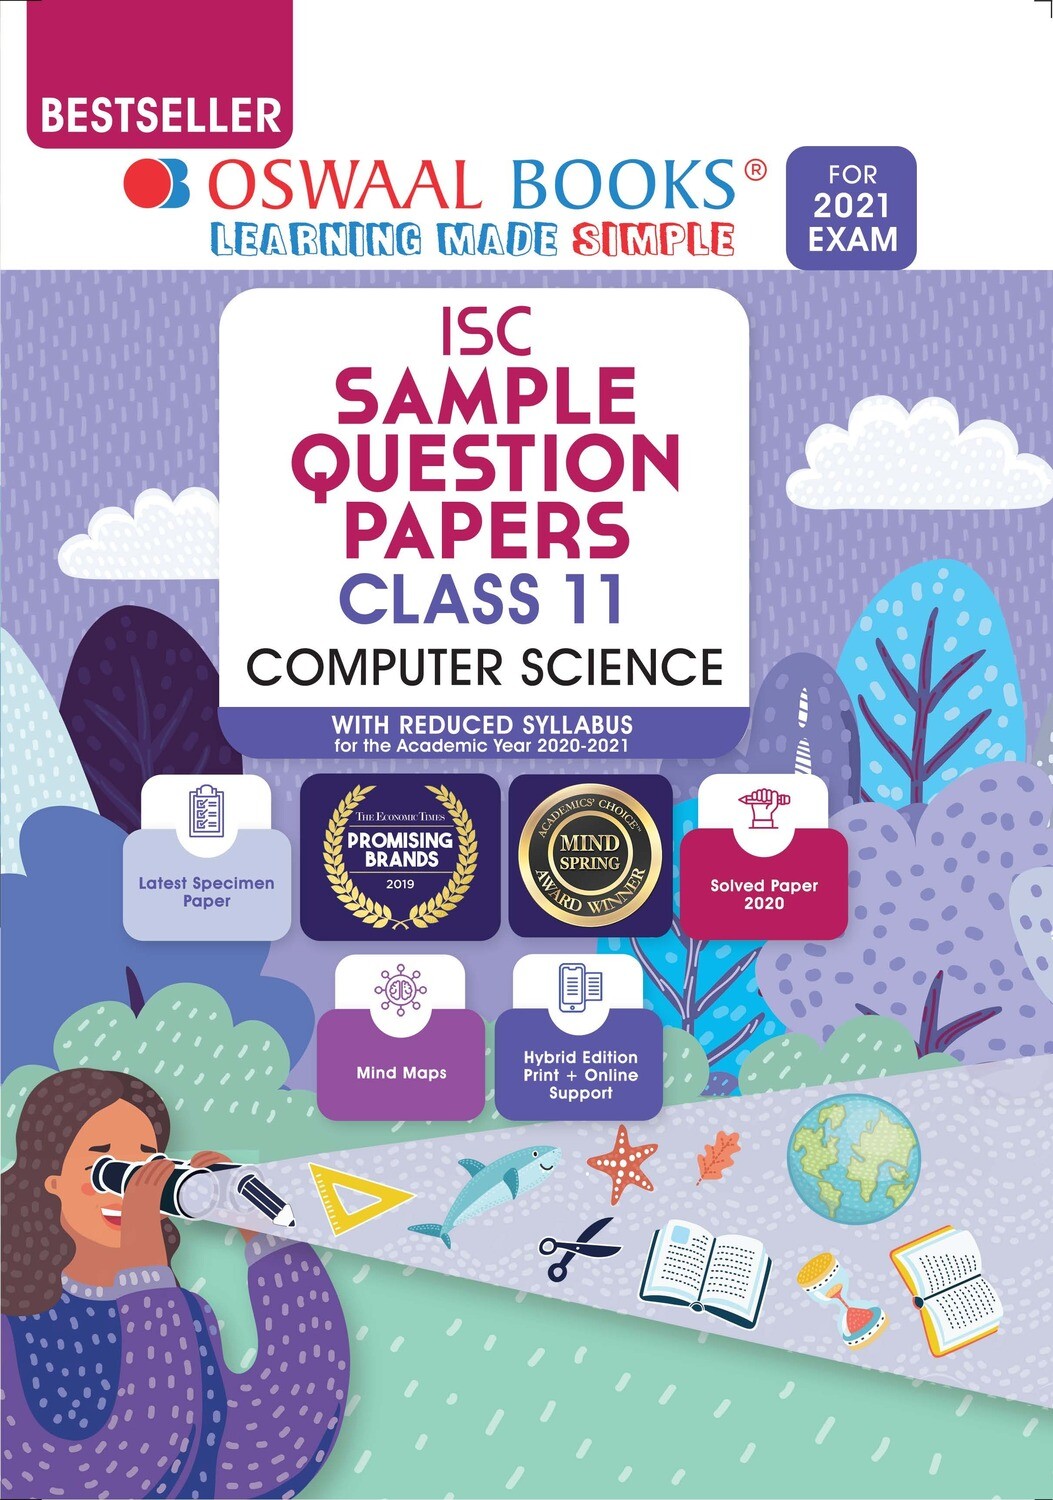 Buy e-book: Oswaal ISC Sample Question Paper Class 11 Computer Science (For 2021 Exam)